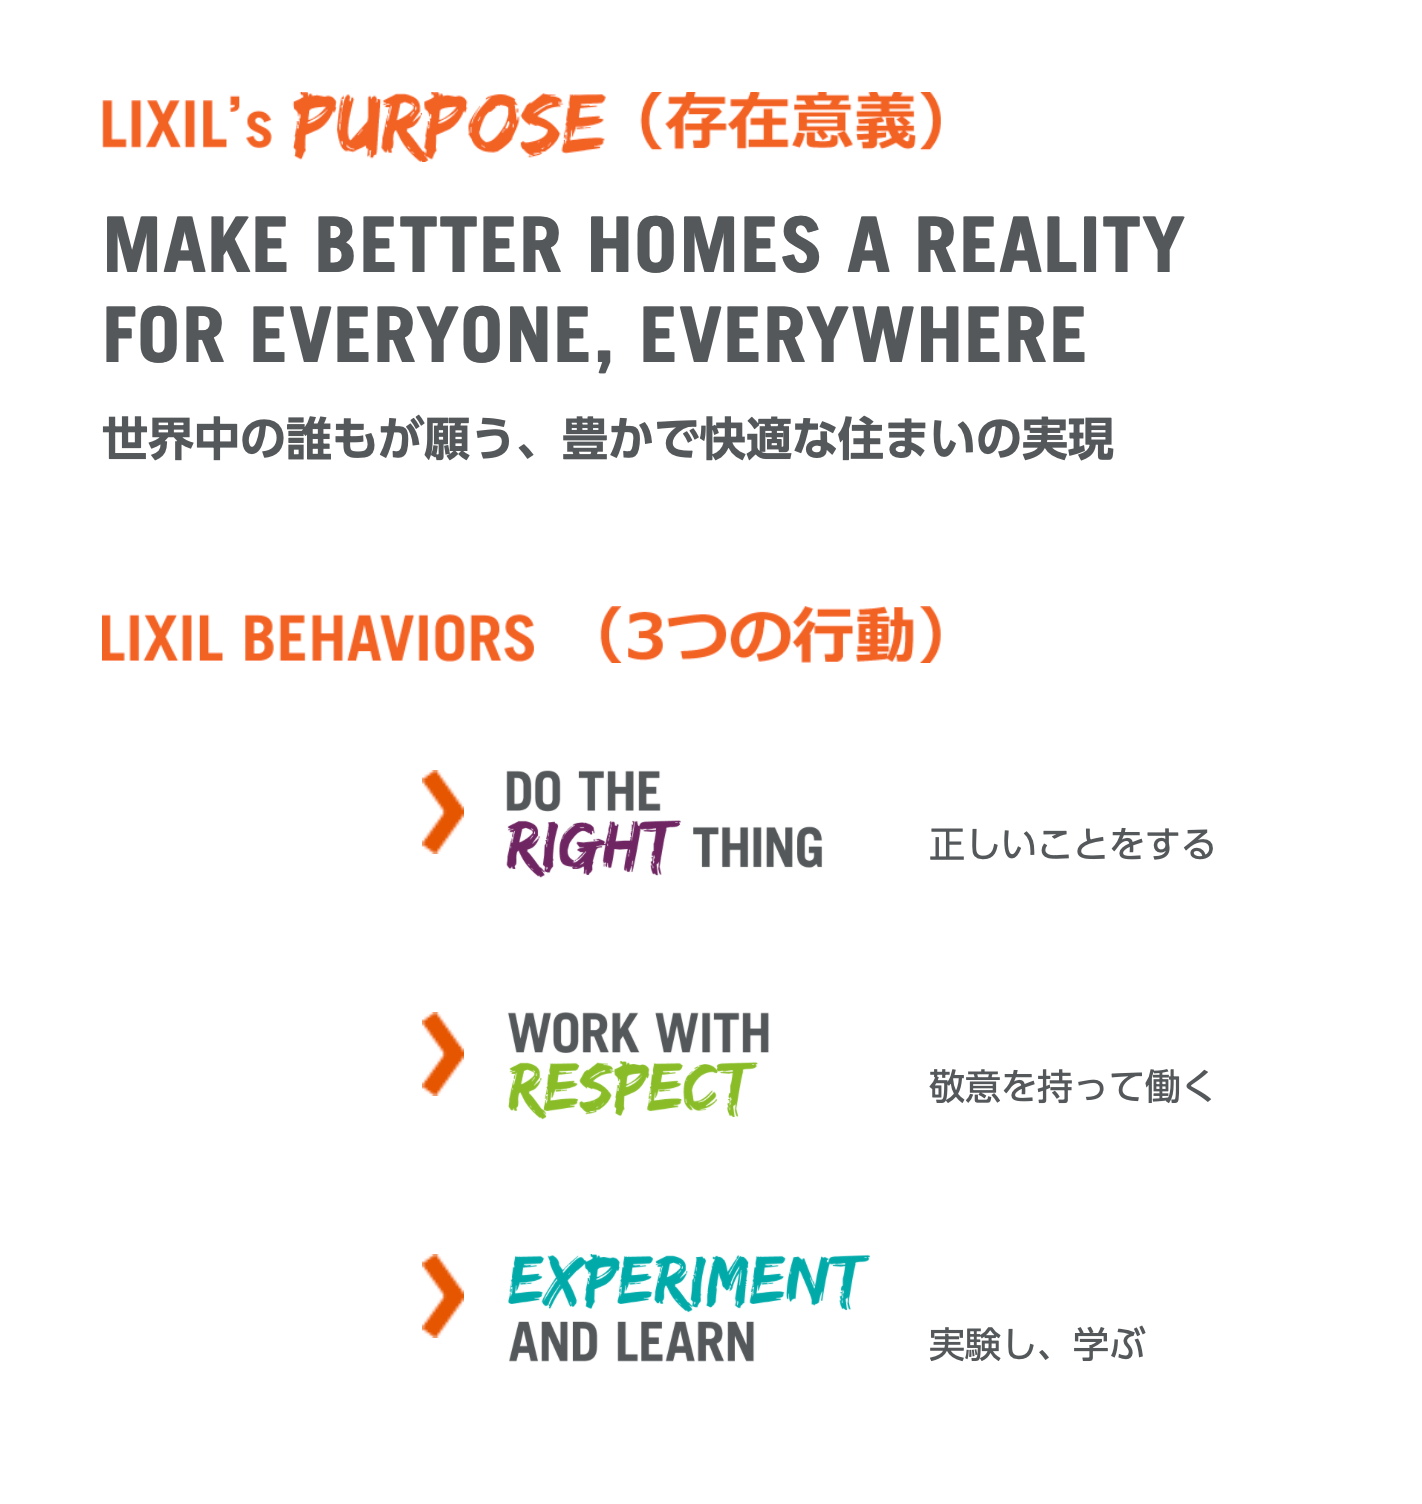 LIXIL's purpose: Make better homes a reality for everyone, everywhere.